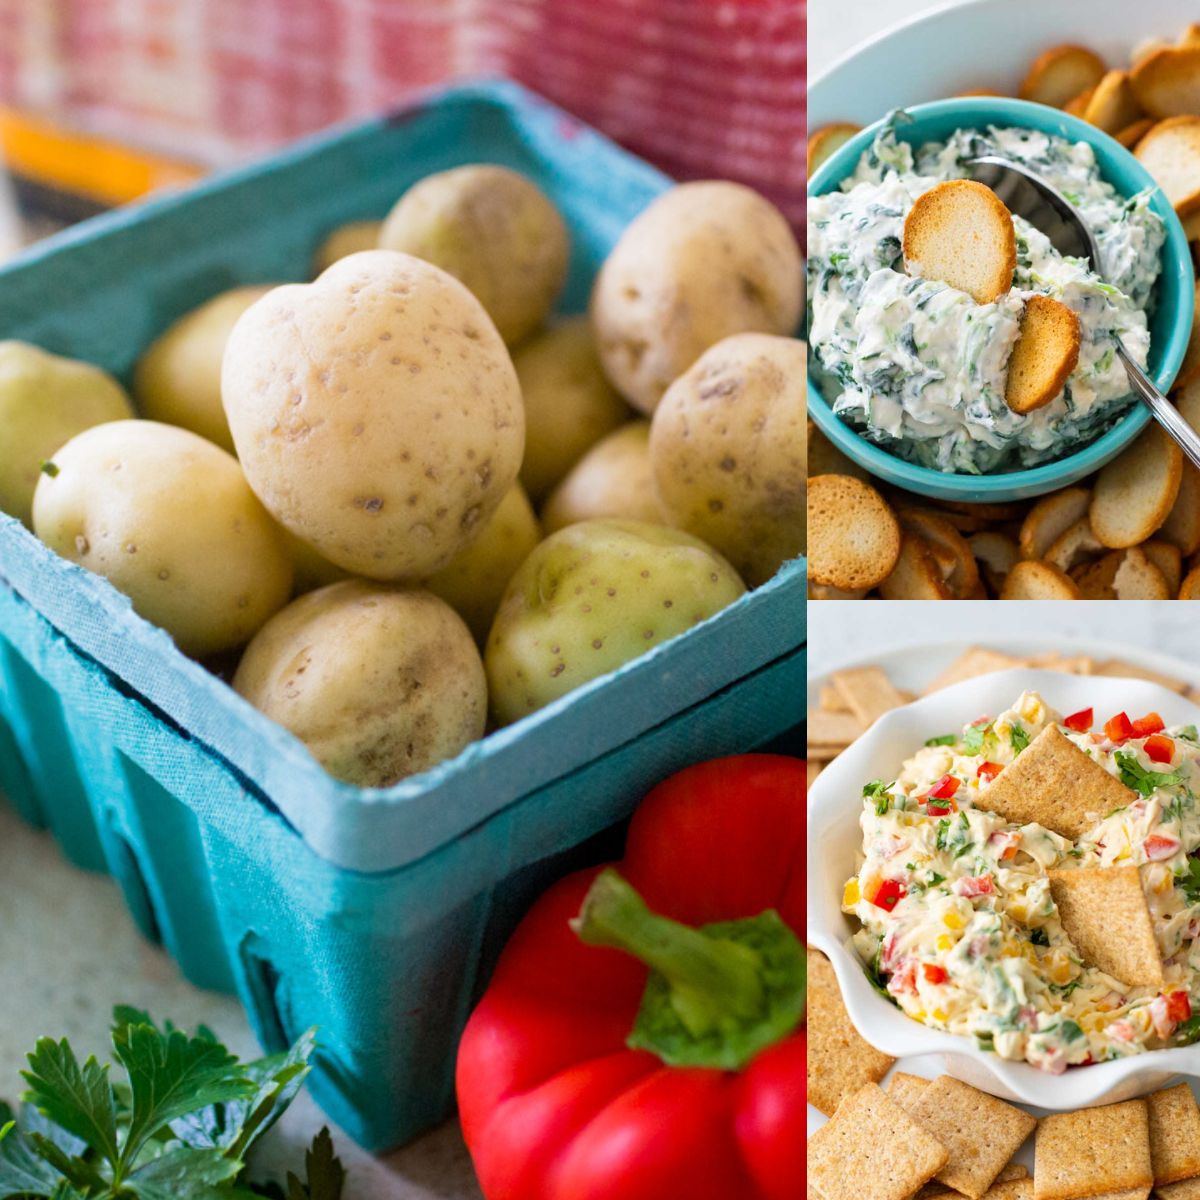 The photo collage shows a pint of potatoes ready to be made into potato salad next to photos of 2 prepared dips with chips.